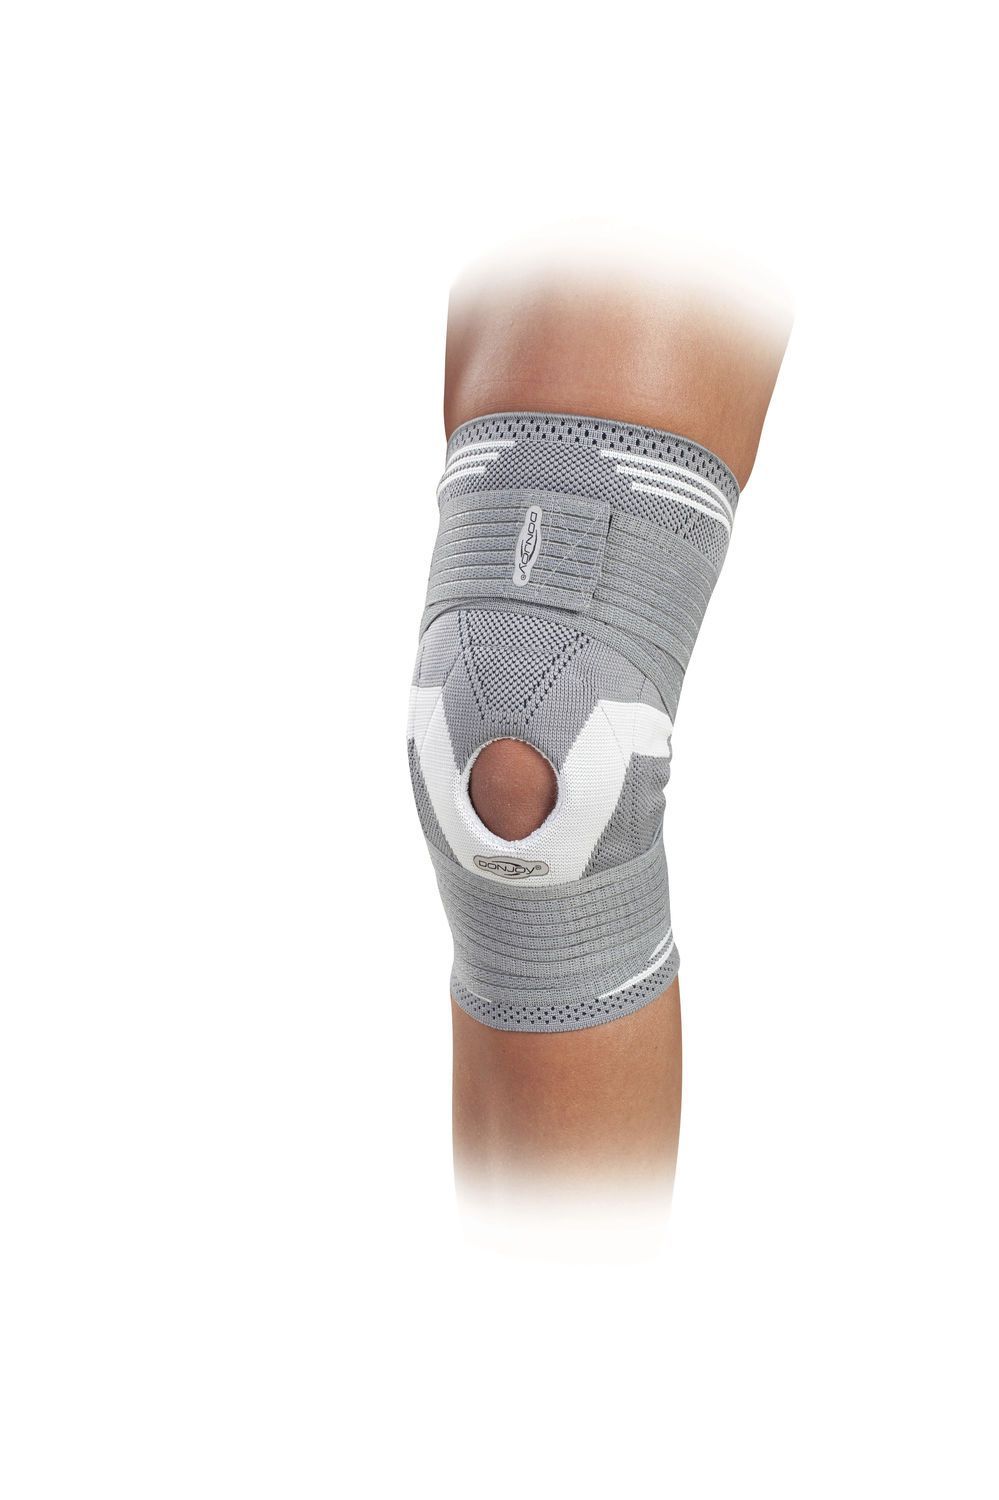 Knee orthosis (orthopedic immobilization) / with patellar buttress / with flexible stays / open knee Strapping™ Elastic Knee DonJoy